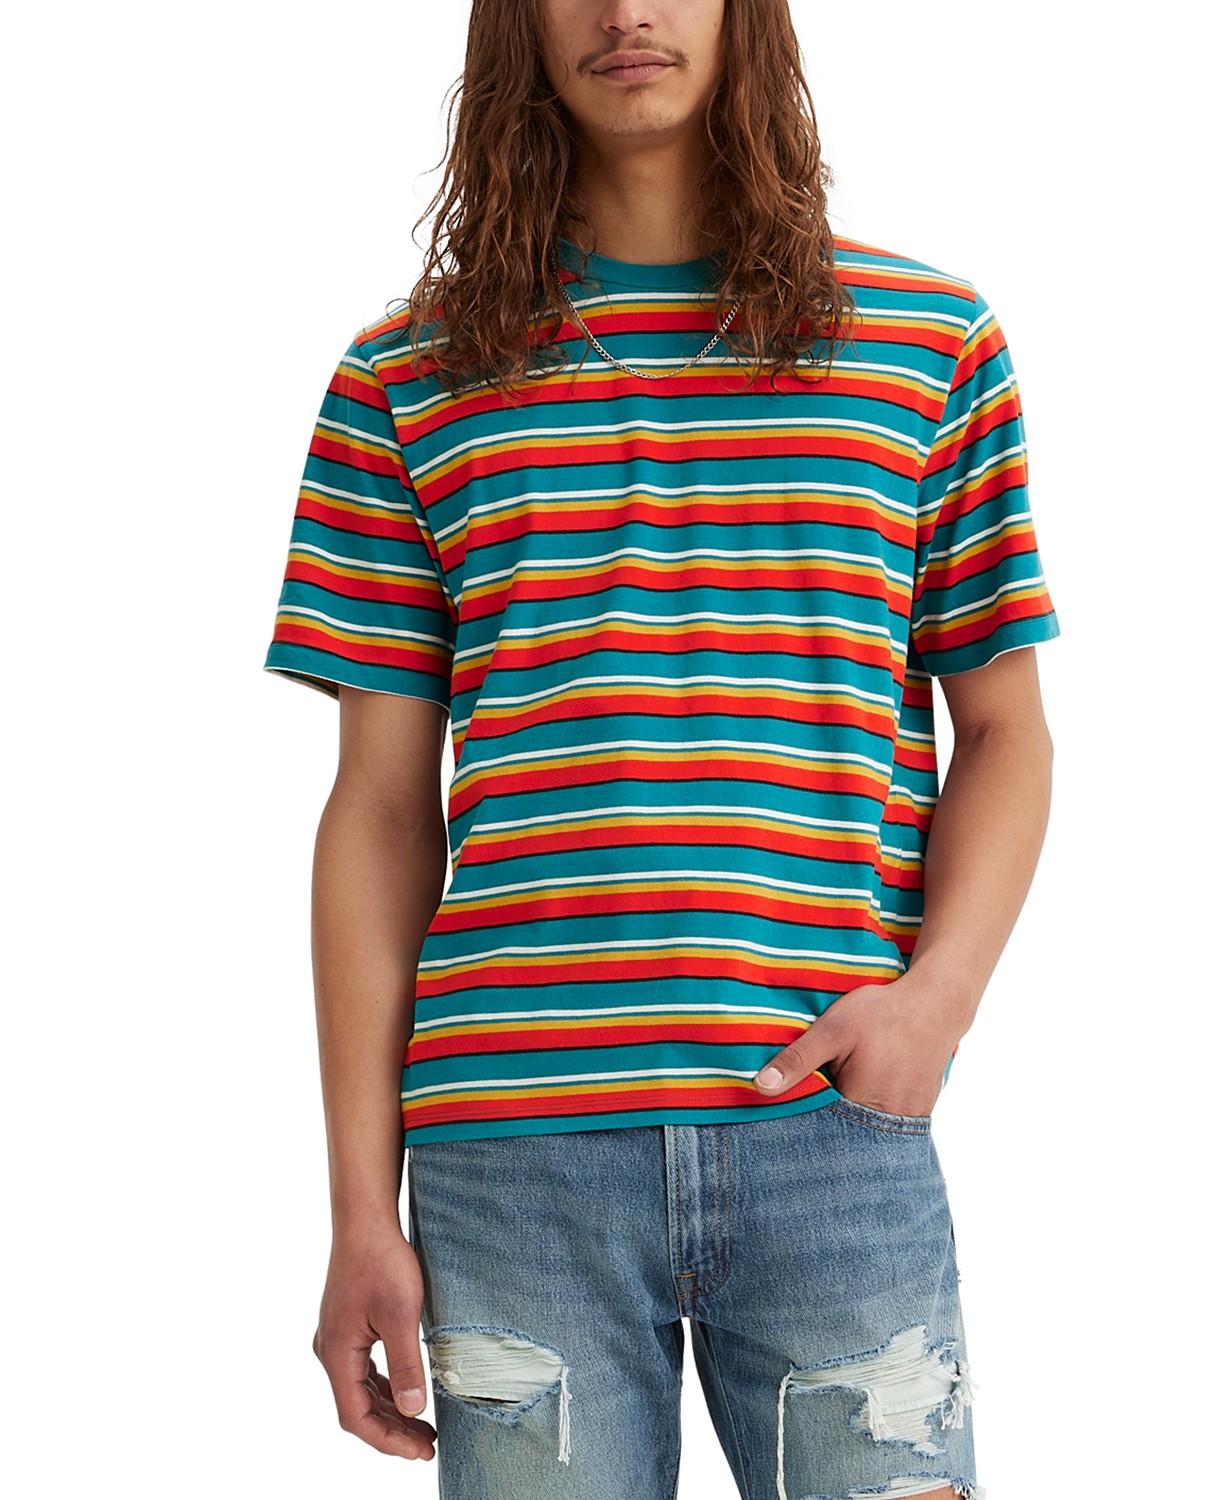 Mens Relaxed-Fit Striped Short Sleeve Crewneck T-Shirt